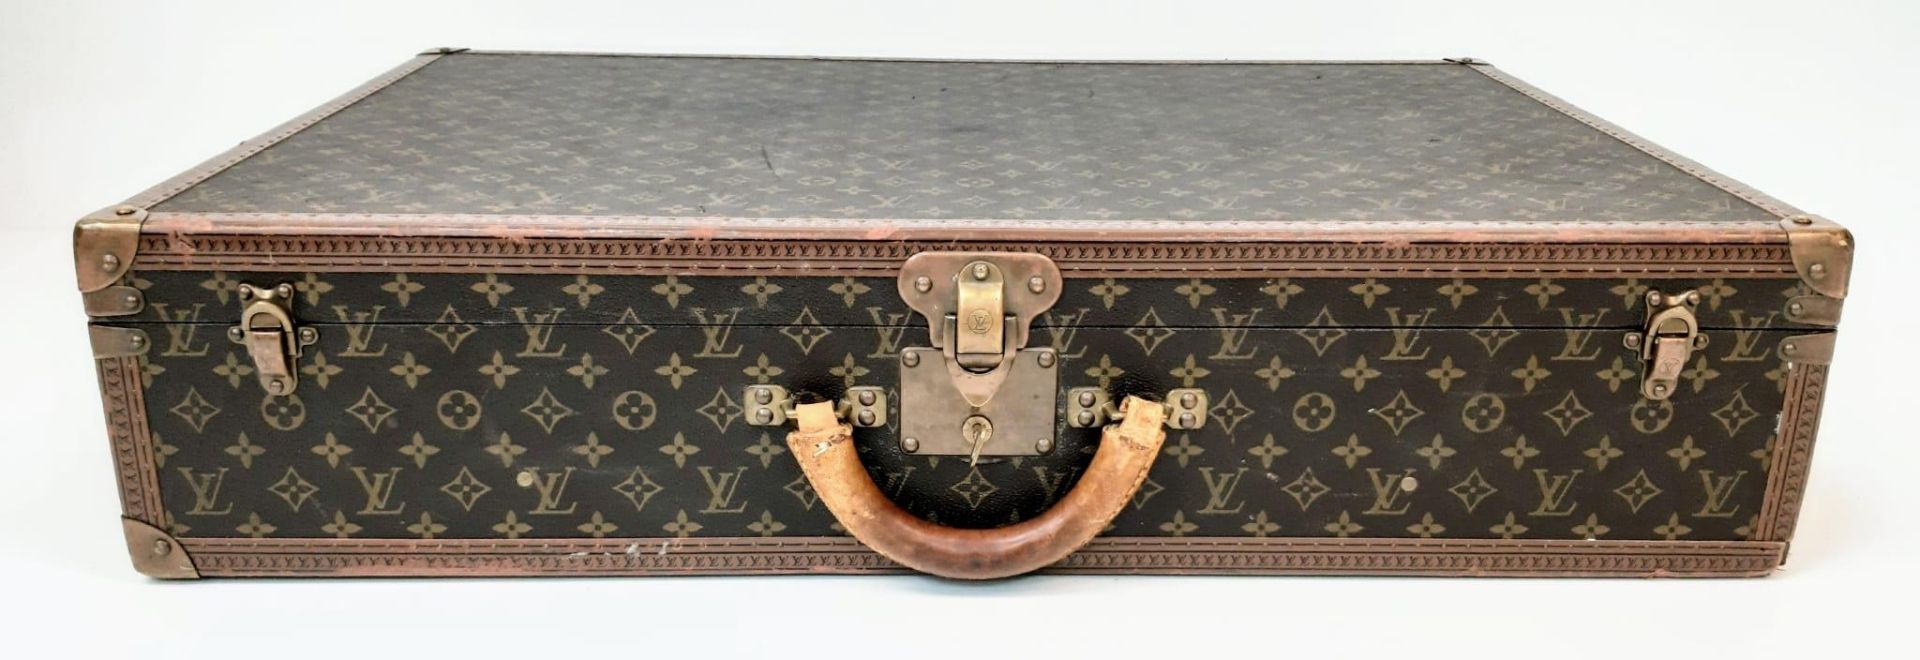 A Vintage Louis Vuitton Bisten 80 Trunk. Famous Monogram Leather With Gold Tone Hardware. Size - Image 6 of 16